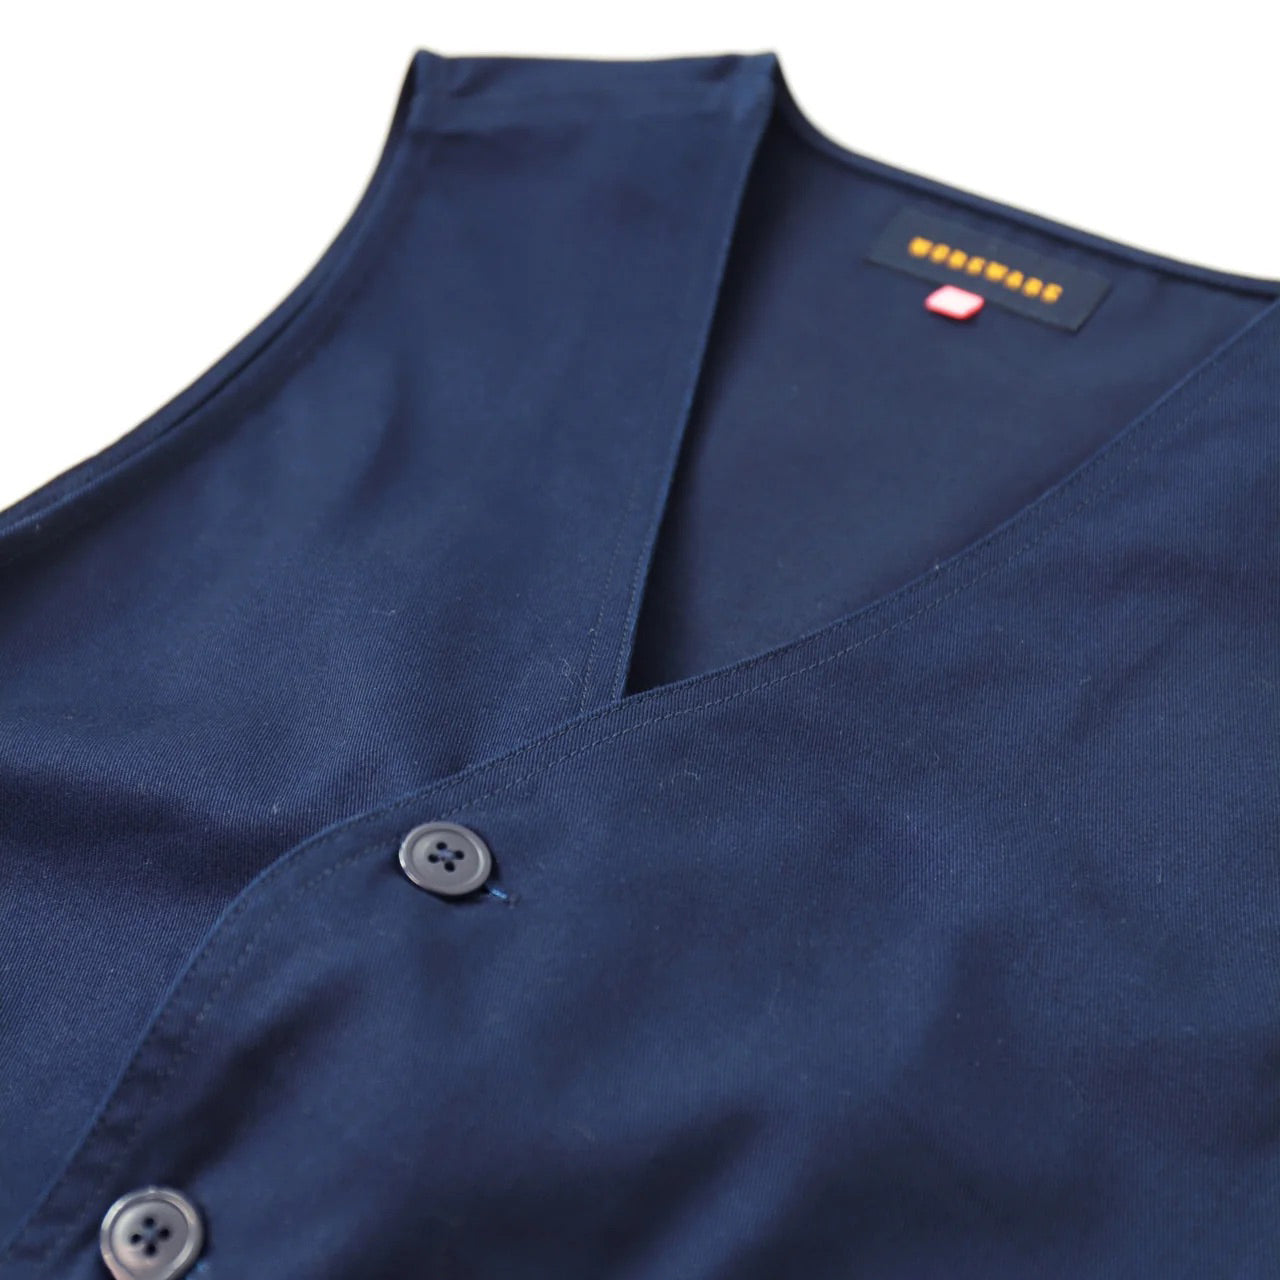 No:#616 | Name:FW23-MRS.WORKWARE FIELD ONE PIECE | Color:Navy | Size:Free【WORKWARE】【入荷予定アイテム・入荷連絡可能】